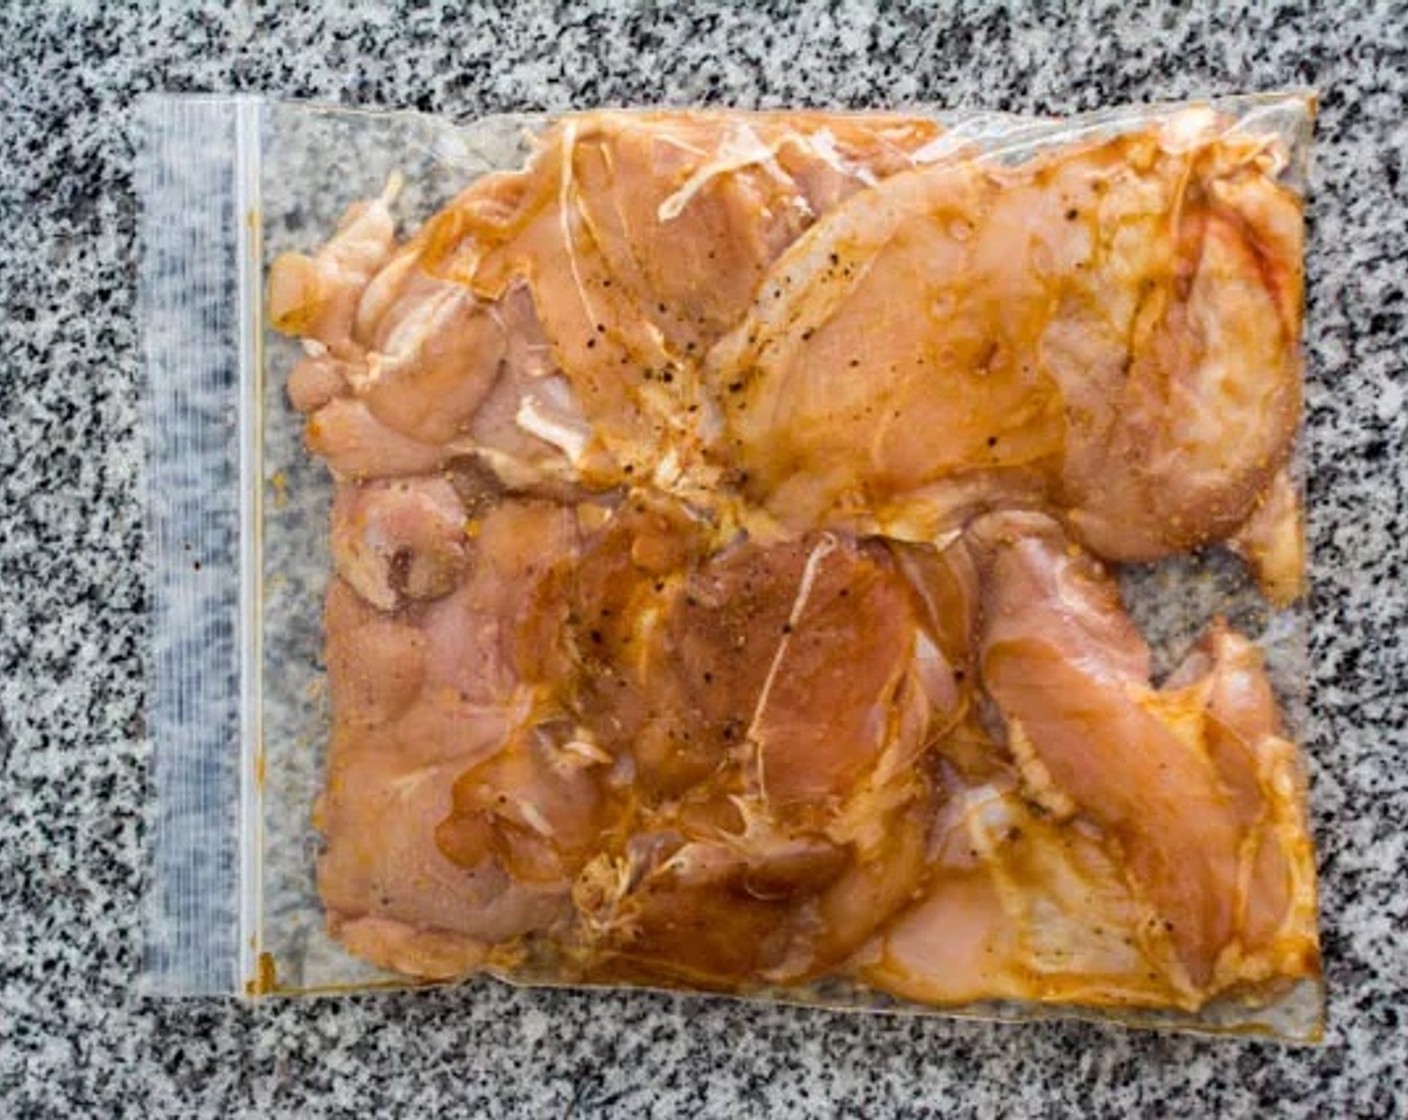 step 2 Marinade chicken in a large Ziploc bag, then add Worcestershire Sauce (3 Tbsp), Light Soy Sauce (1 Tbsp), Salt (1/2 tsp), and Ground Black Pepper (1 dash). Mix well and allow the chicken to marinade for about 1-3 hours.